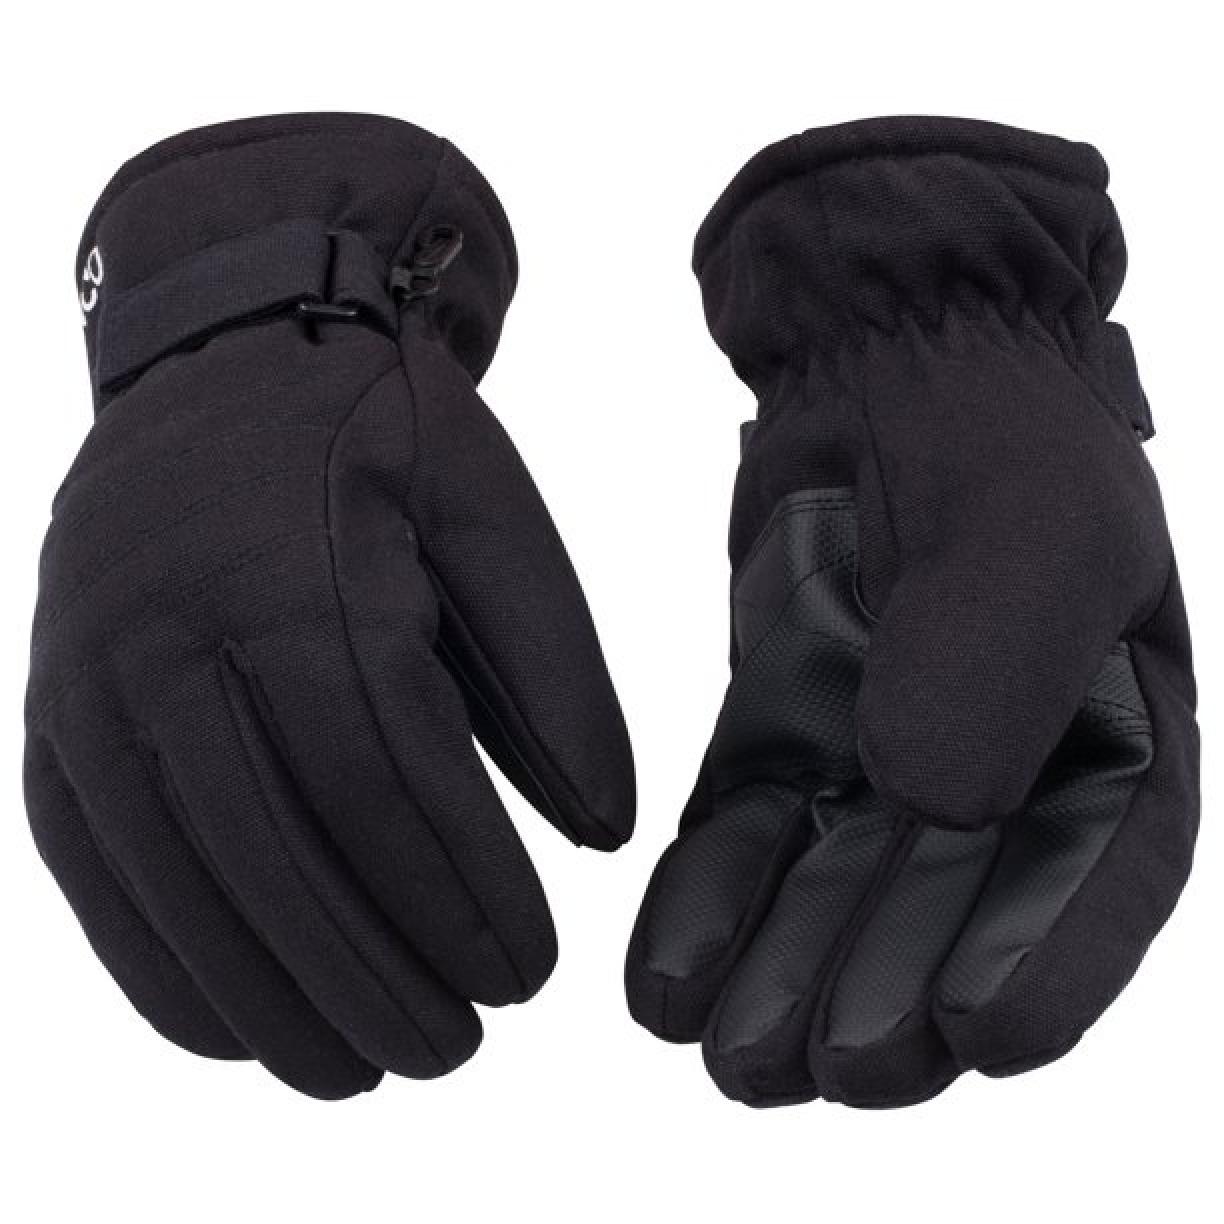 Kinco Hydroflector Lined Waterproof Black Duck Ski Glove With Pull-Strap